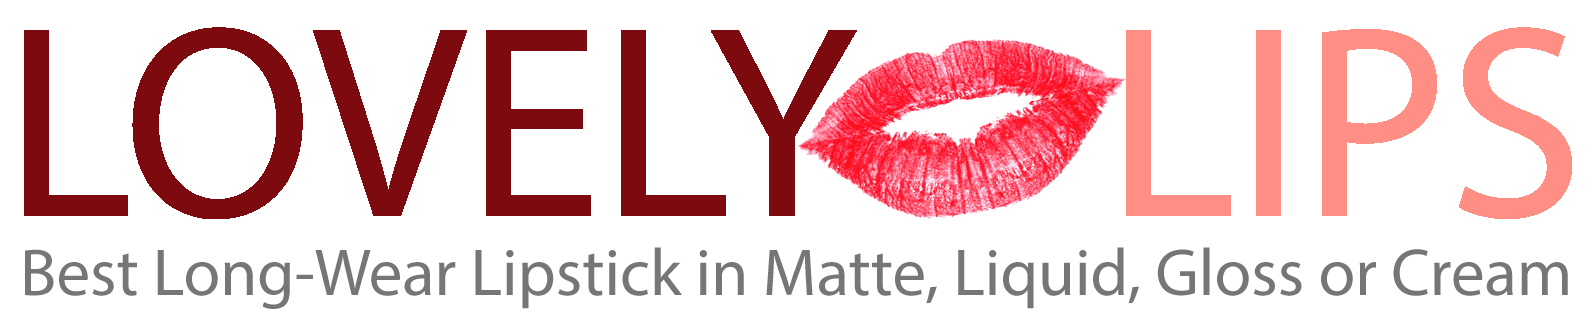 Lipstick Red N Logo - The Benefits of of Wearing Lipstick - Physically and Psychologically